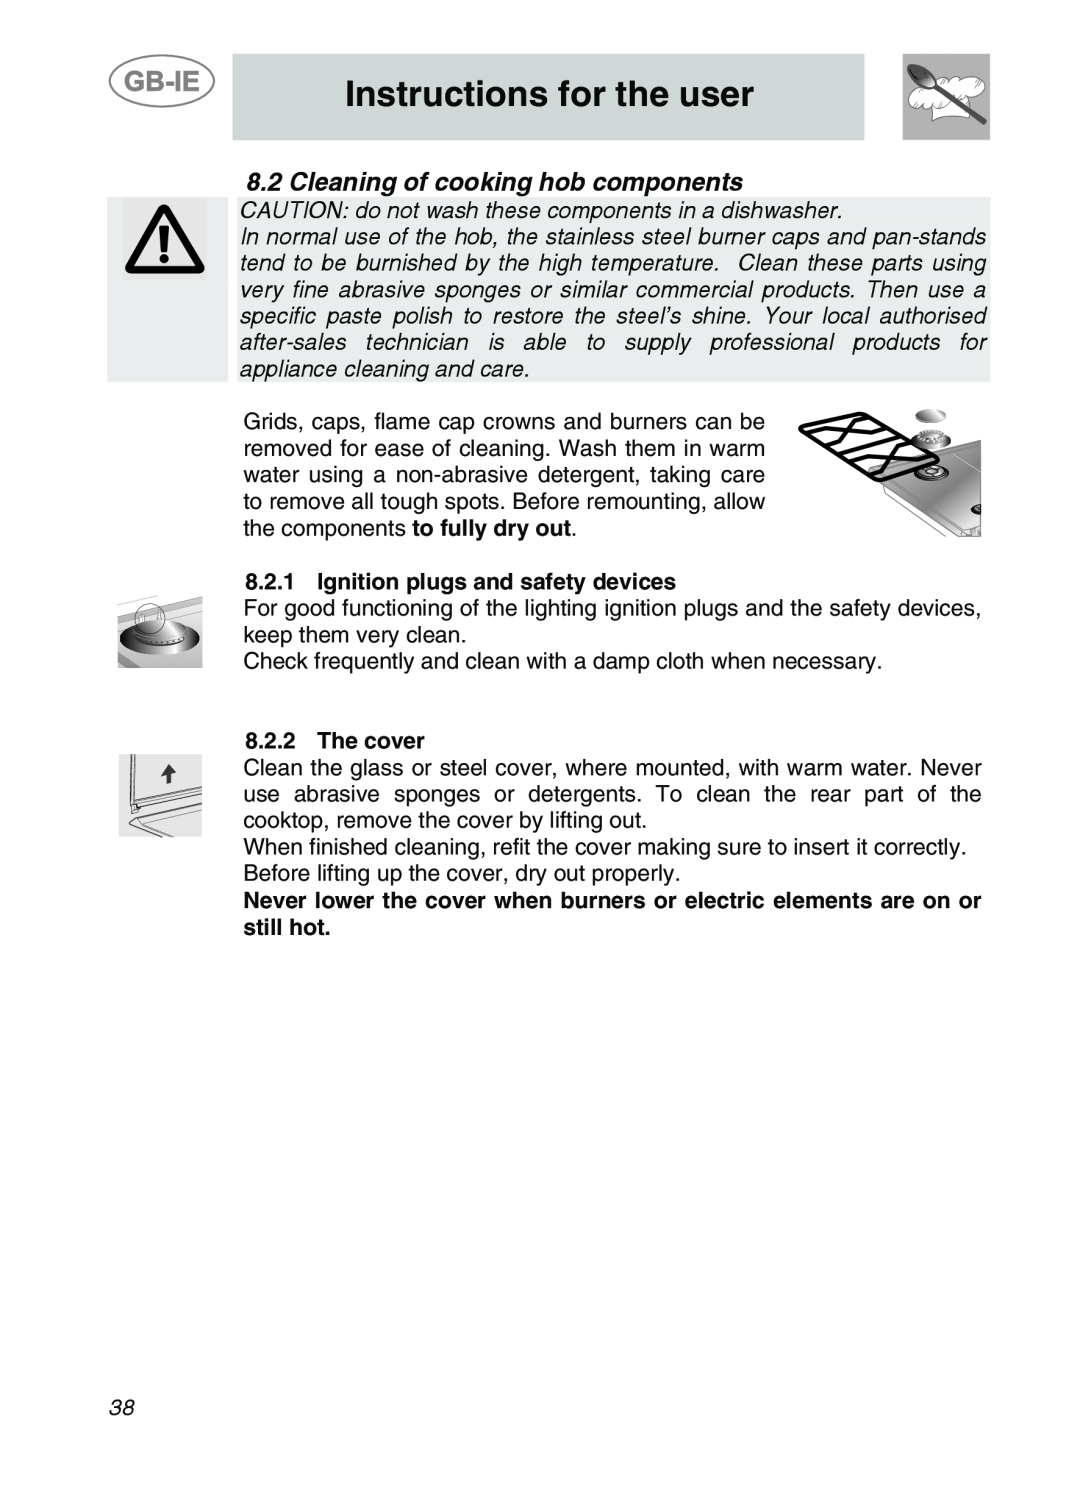 Smeg SDR60XG3 manual 8.2Cleaning of cooking hob components, Instructions for the user, Ignition plugs and safety devices 